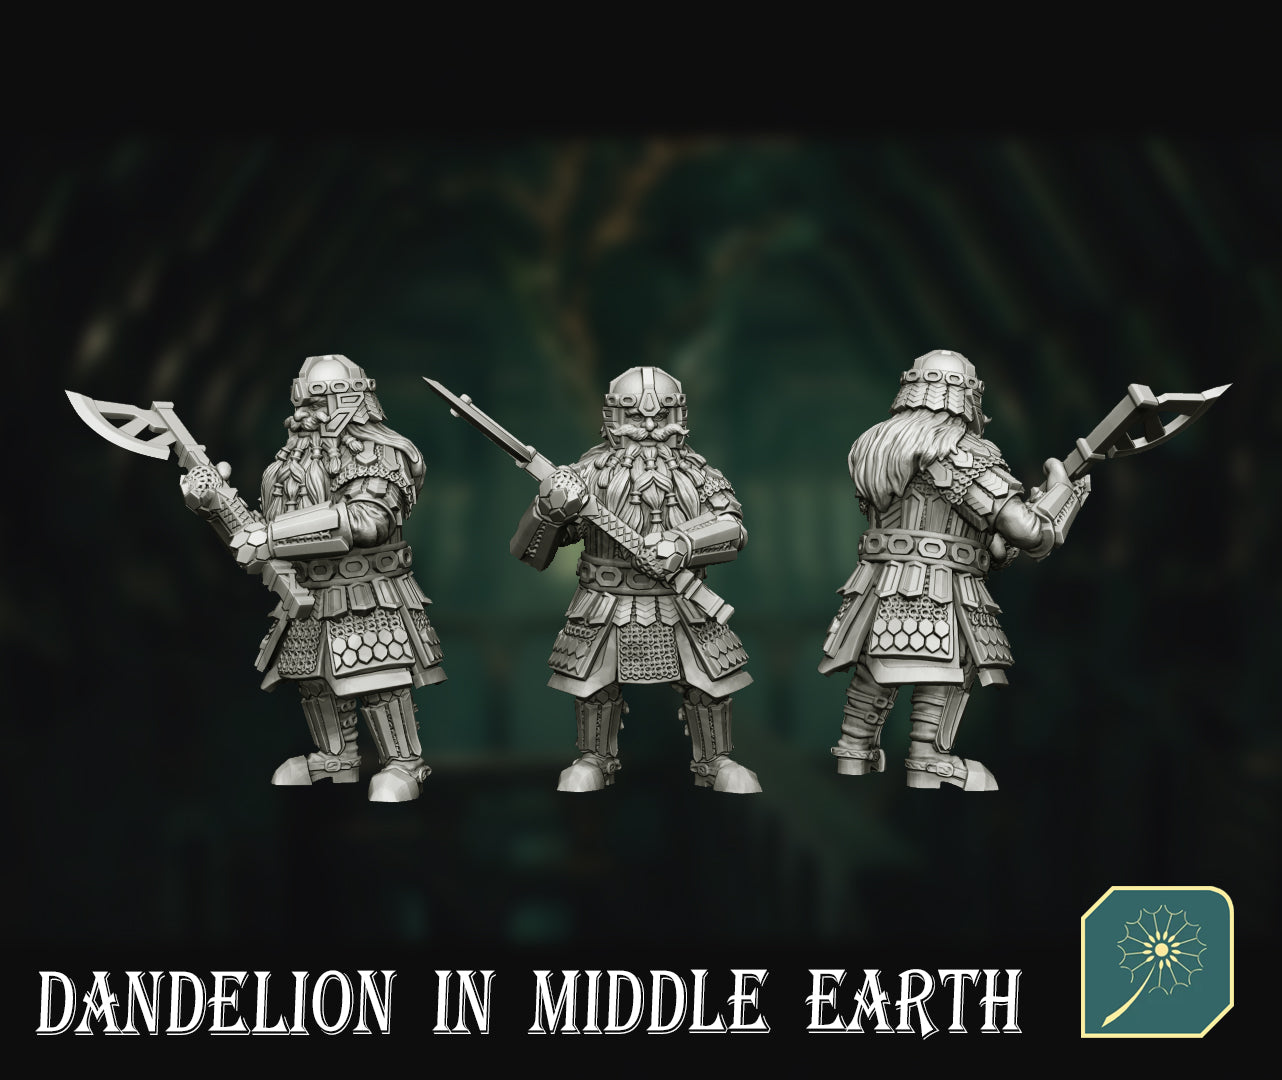 Master Dwarf Giloin from Dandelion in Middle Earth